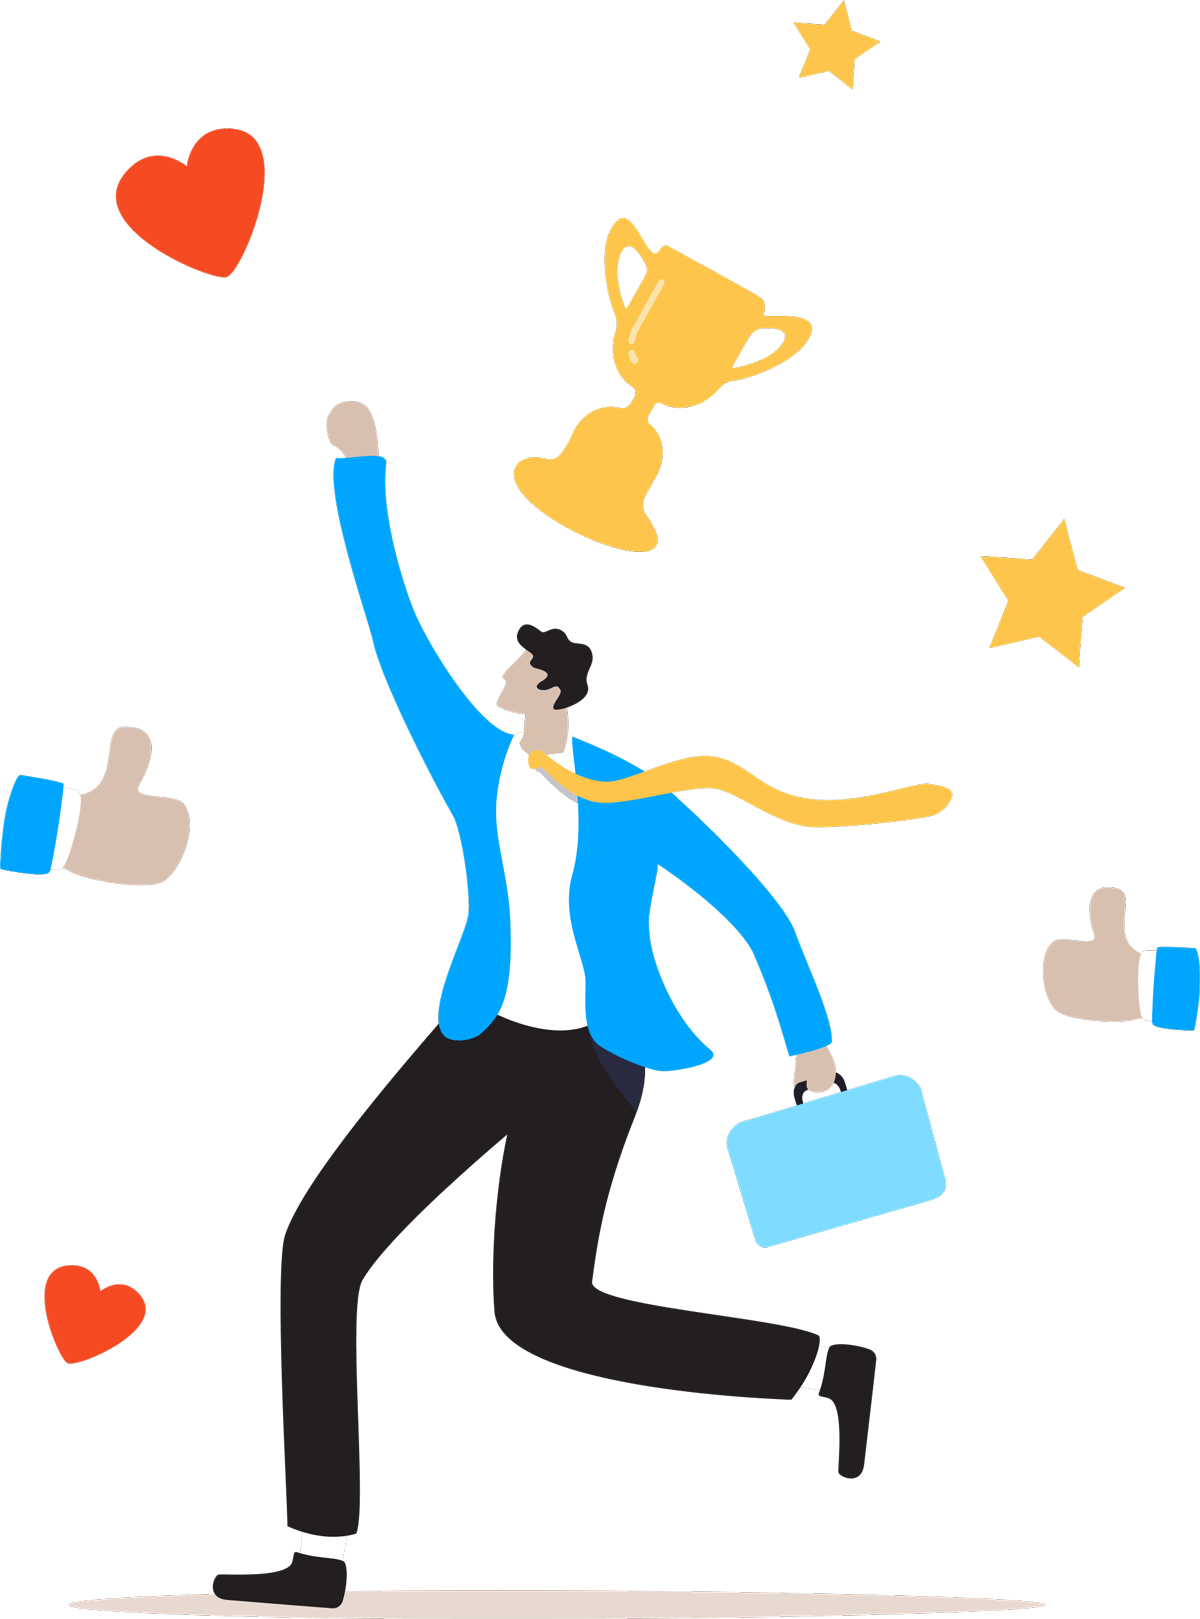 https://www.myboost.co.nz/wp-content/uploads/2022/11/Illustration-employee-appreciation-thumbs-up.png